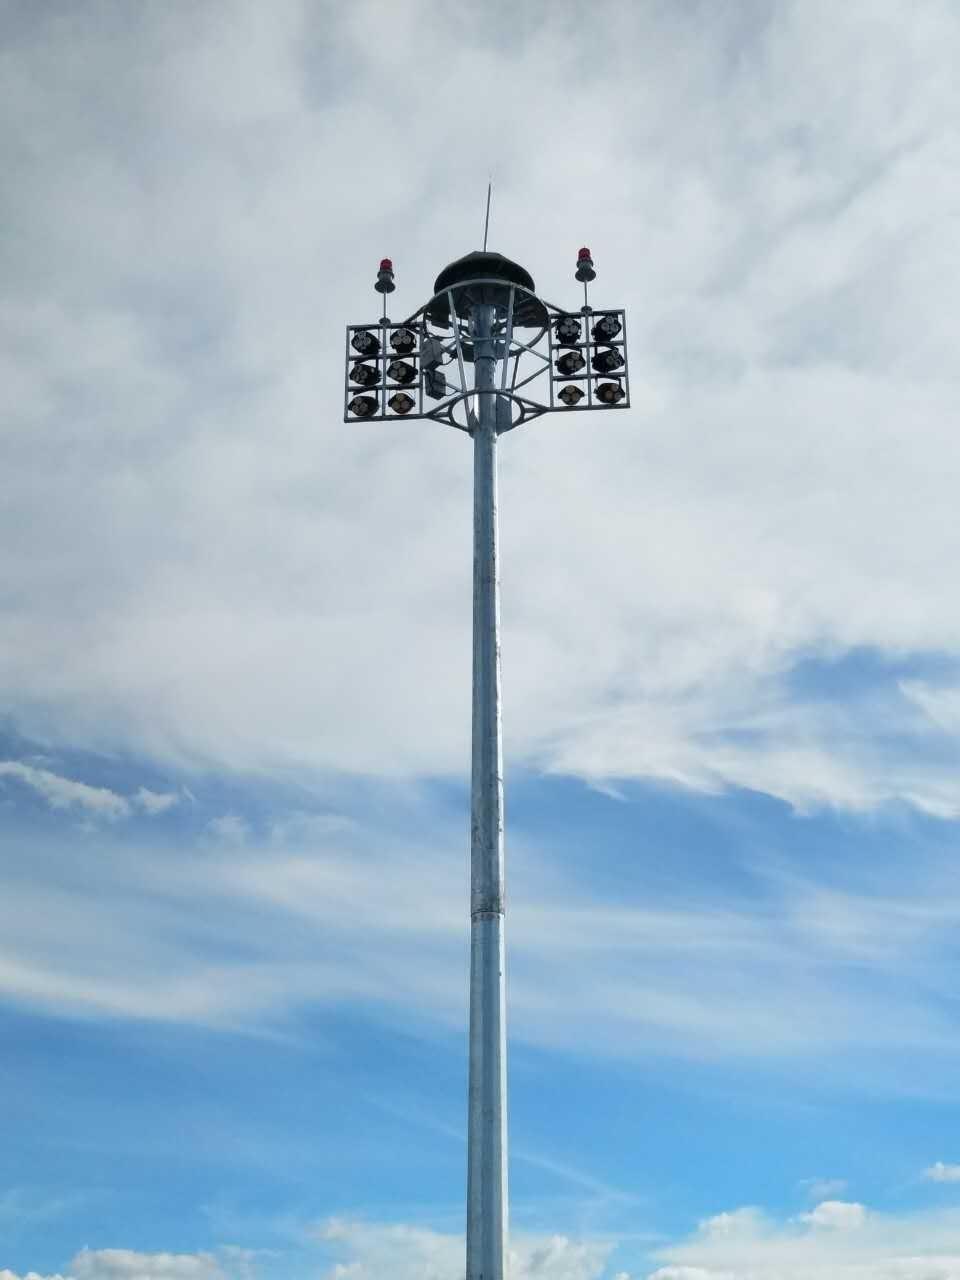 Professional 15m High Mast Light with Airport Certificate